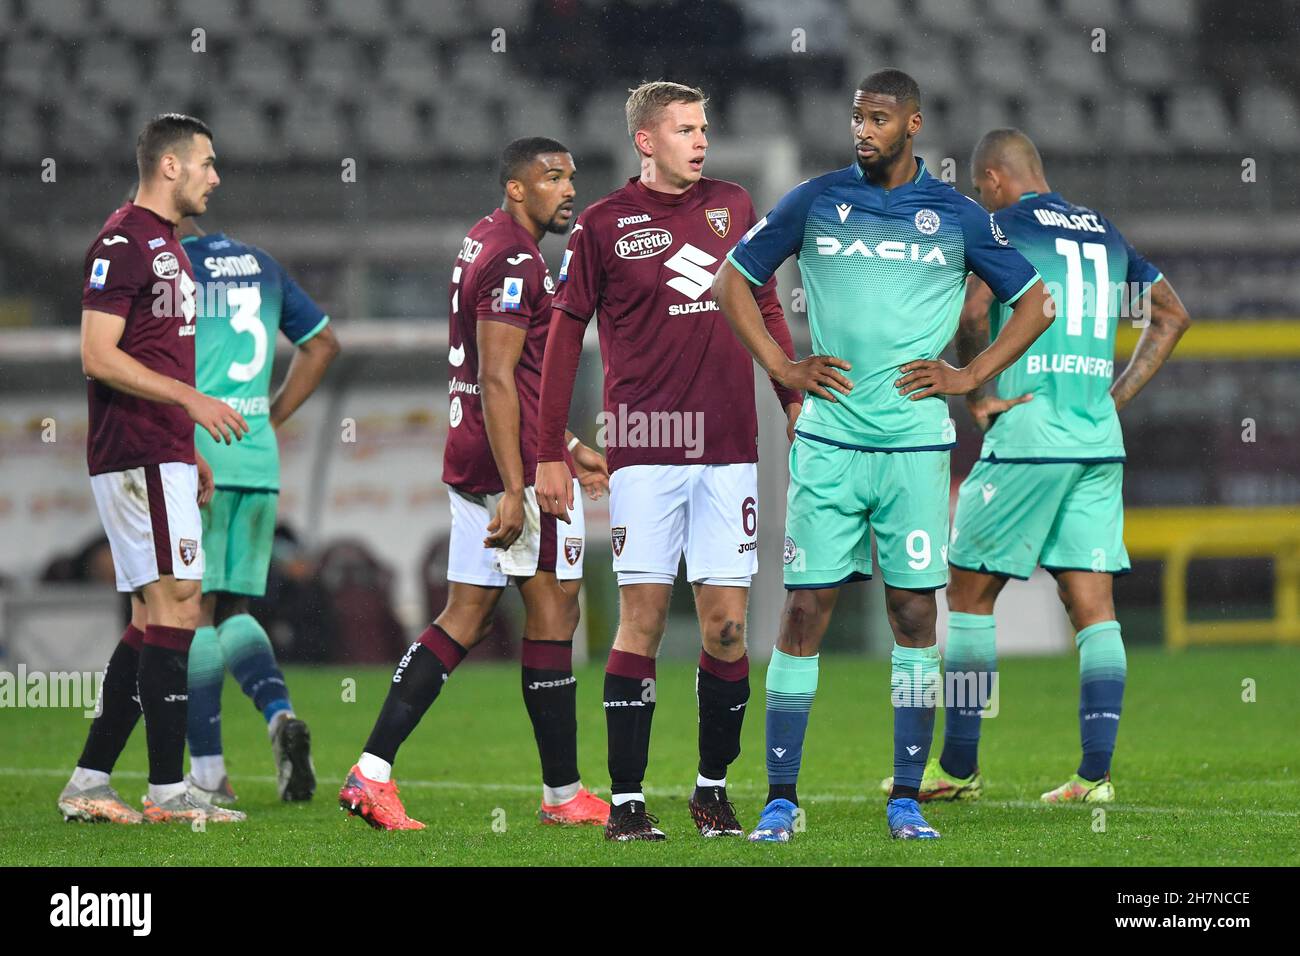 Torino, Italy. 22nd, November 2021. Beto (9) of Udinese and David Zima (6) of Torino seen in the Serie A match between Torino and Udinese at Stadio Olimpico in Torino. (Photo credit: Gonzales Photo - Tommaso Fimiano). Stock Photo